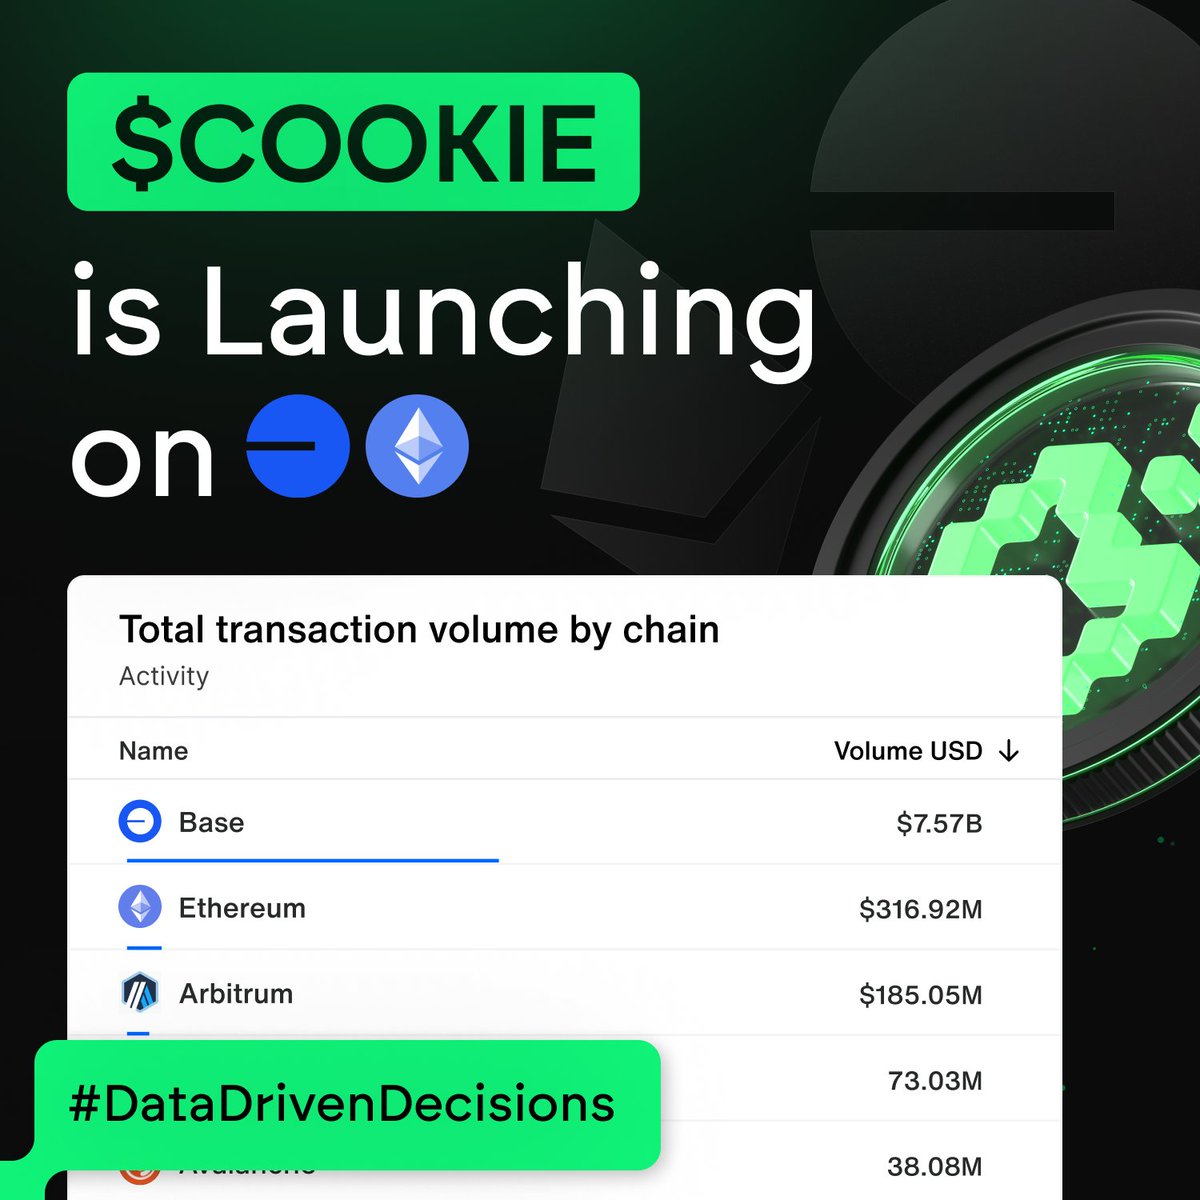 We have found the perfect ovens for $COOKIEs! 👀 $COOKIE is launching on👇 @base: Ethereum L2. Fast. Cost effective. Dev friendly. Onboarding billions on chain. @ethereum: The OG. Secure foundation. ETF-approved. And guess what? This decision was driven by YOUR data! 📊